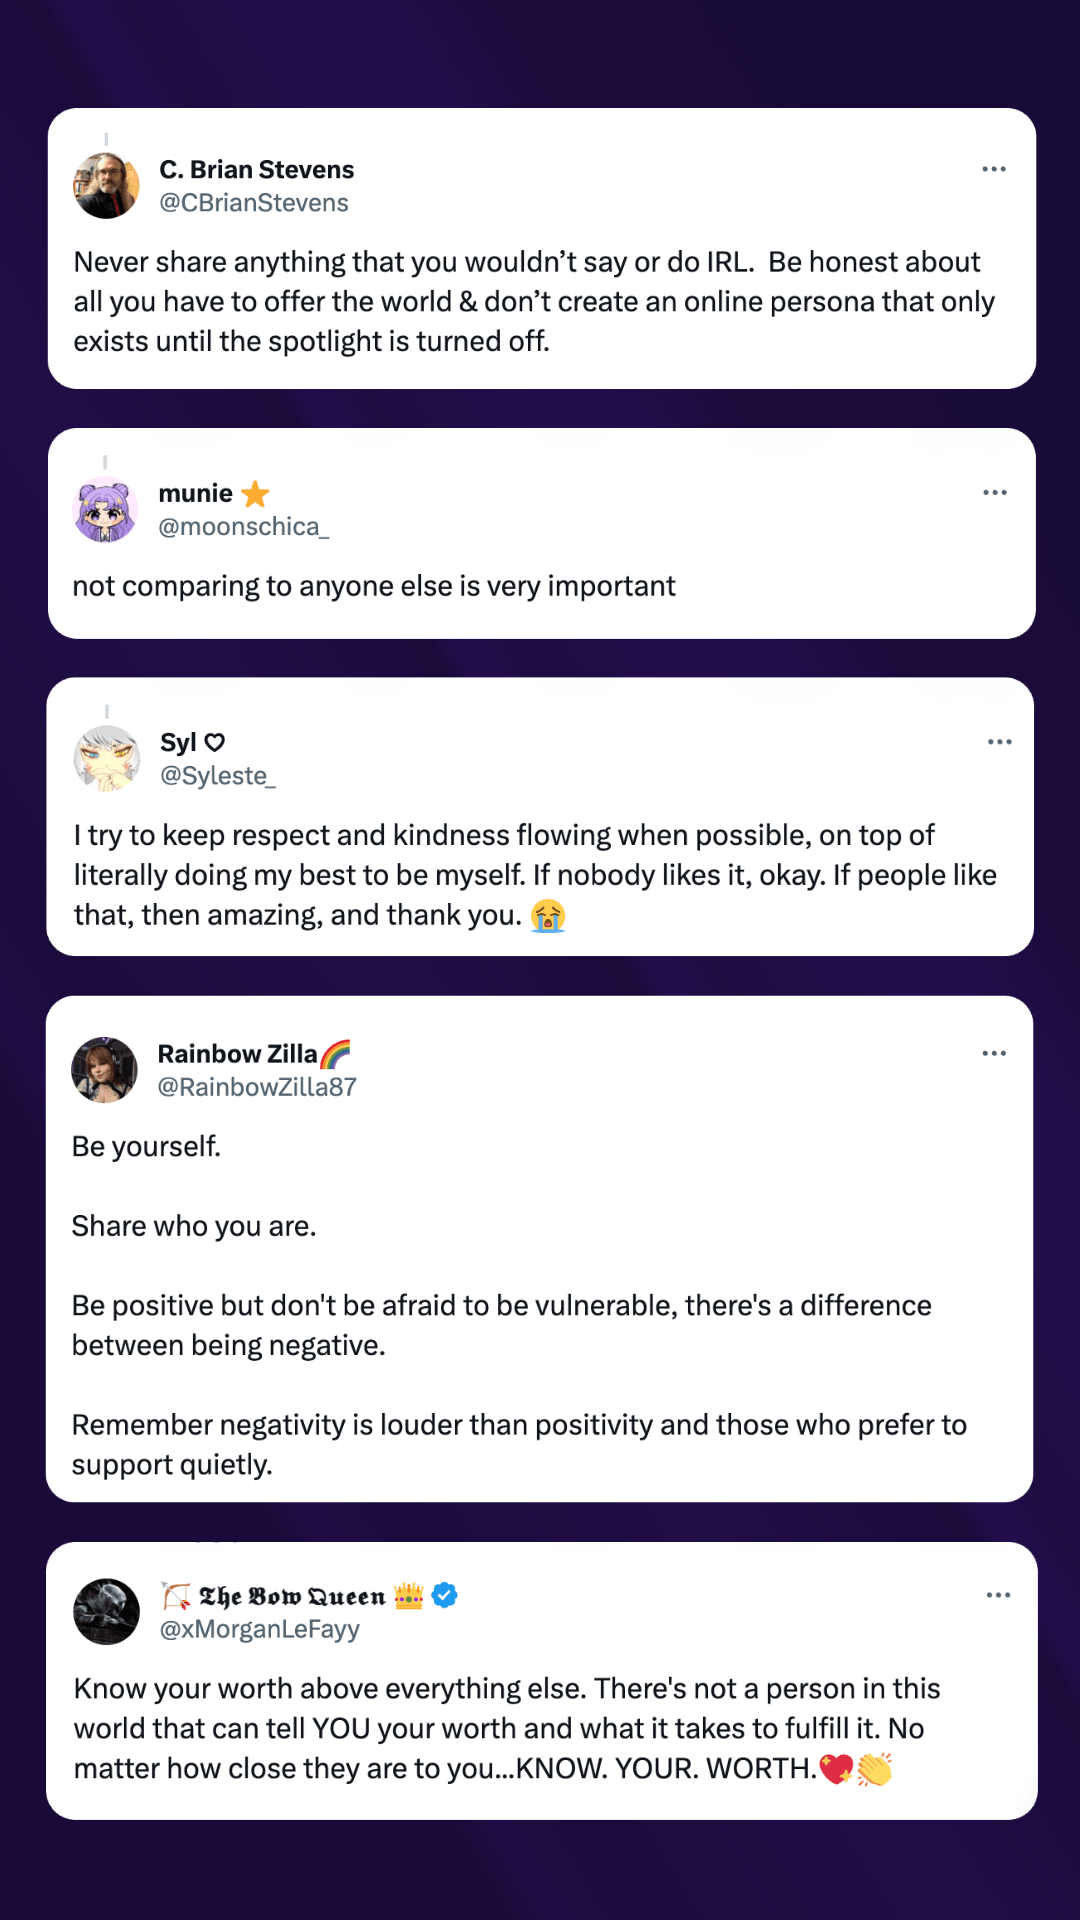 5 tweet screenshots from 5 different users: @CBrianStevens, @moonschica_, @Syleste_, @RainbowZilla87, and @xMorganLeFayy.  All the tweets are their advice on how to be authentic (summed above), and there is a dark blue background behind the screenshots.